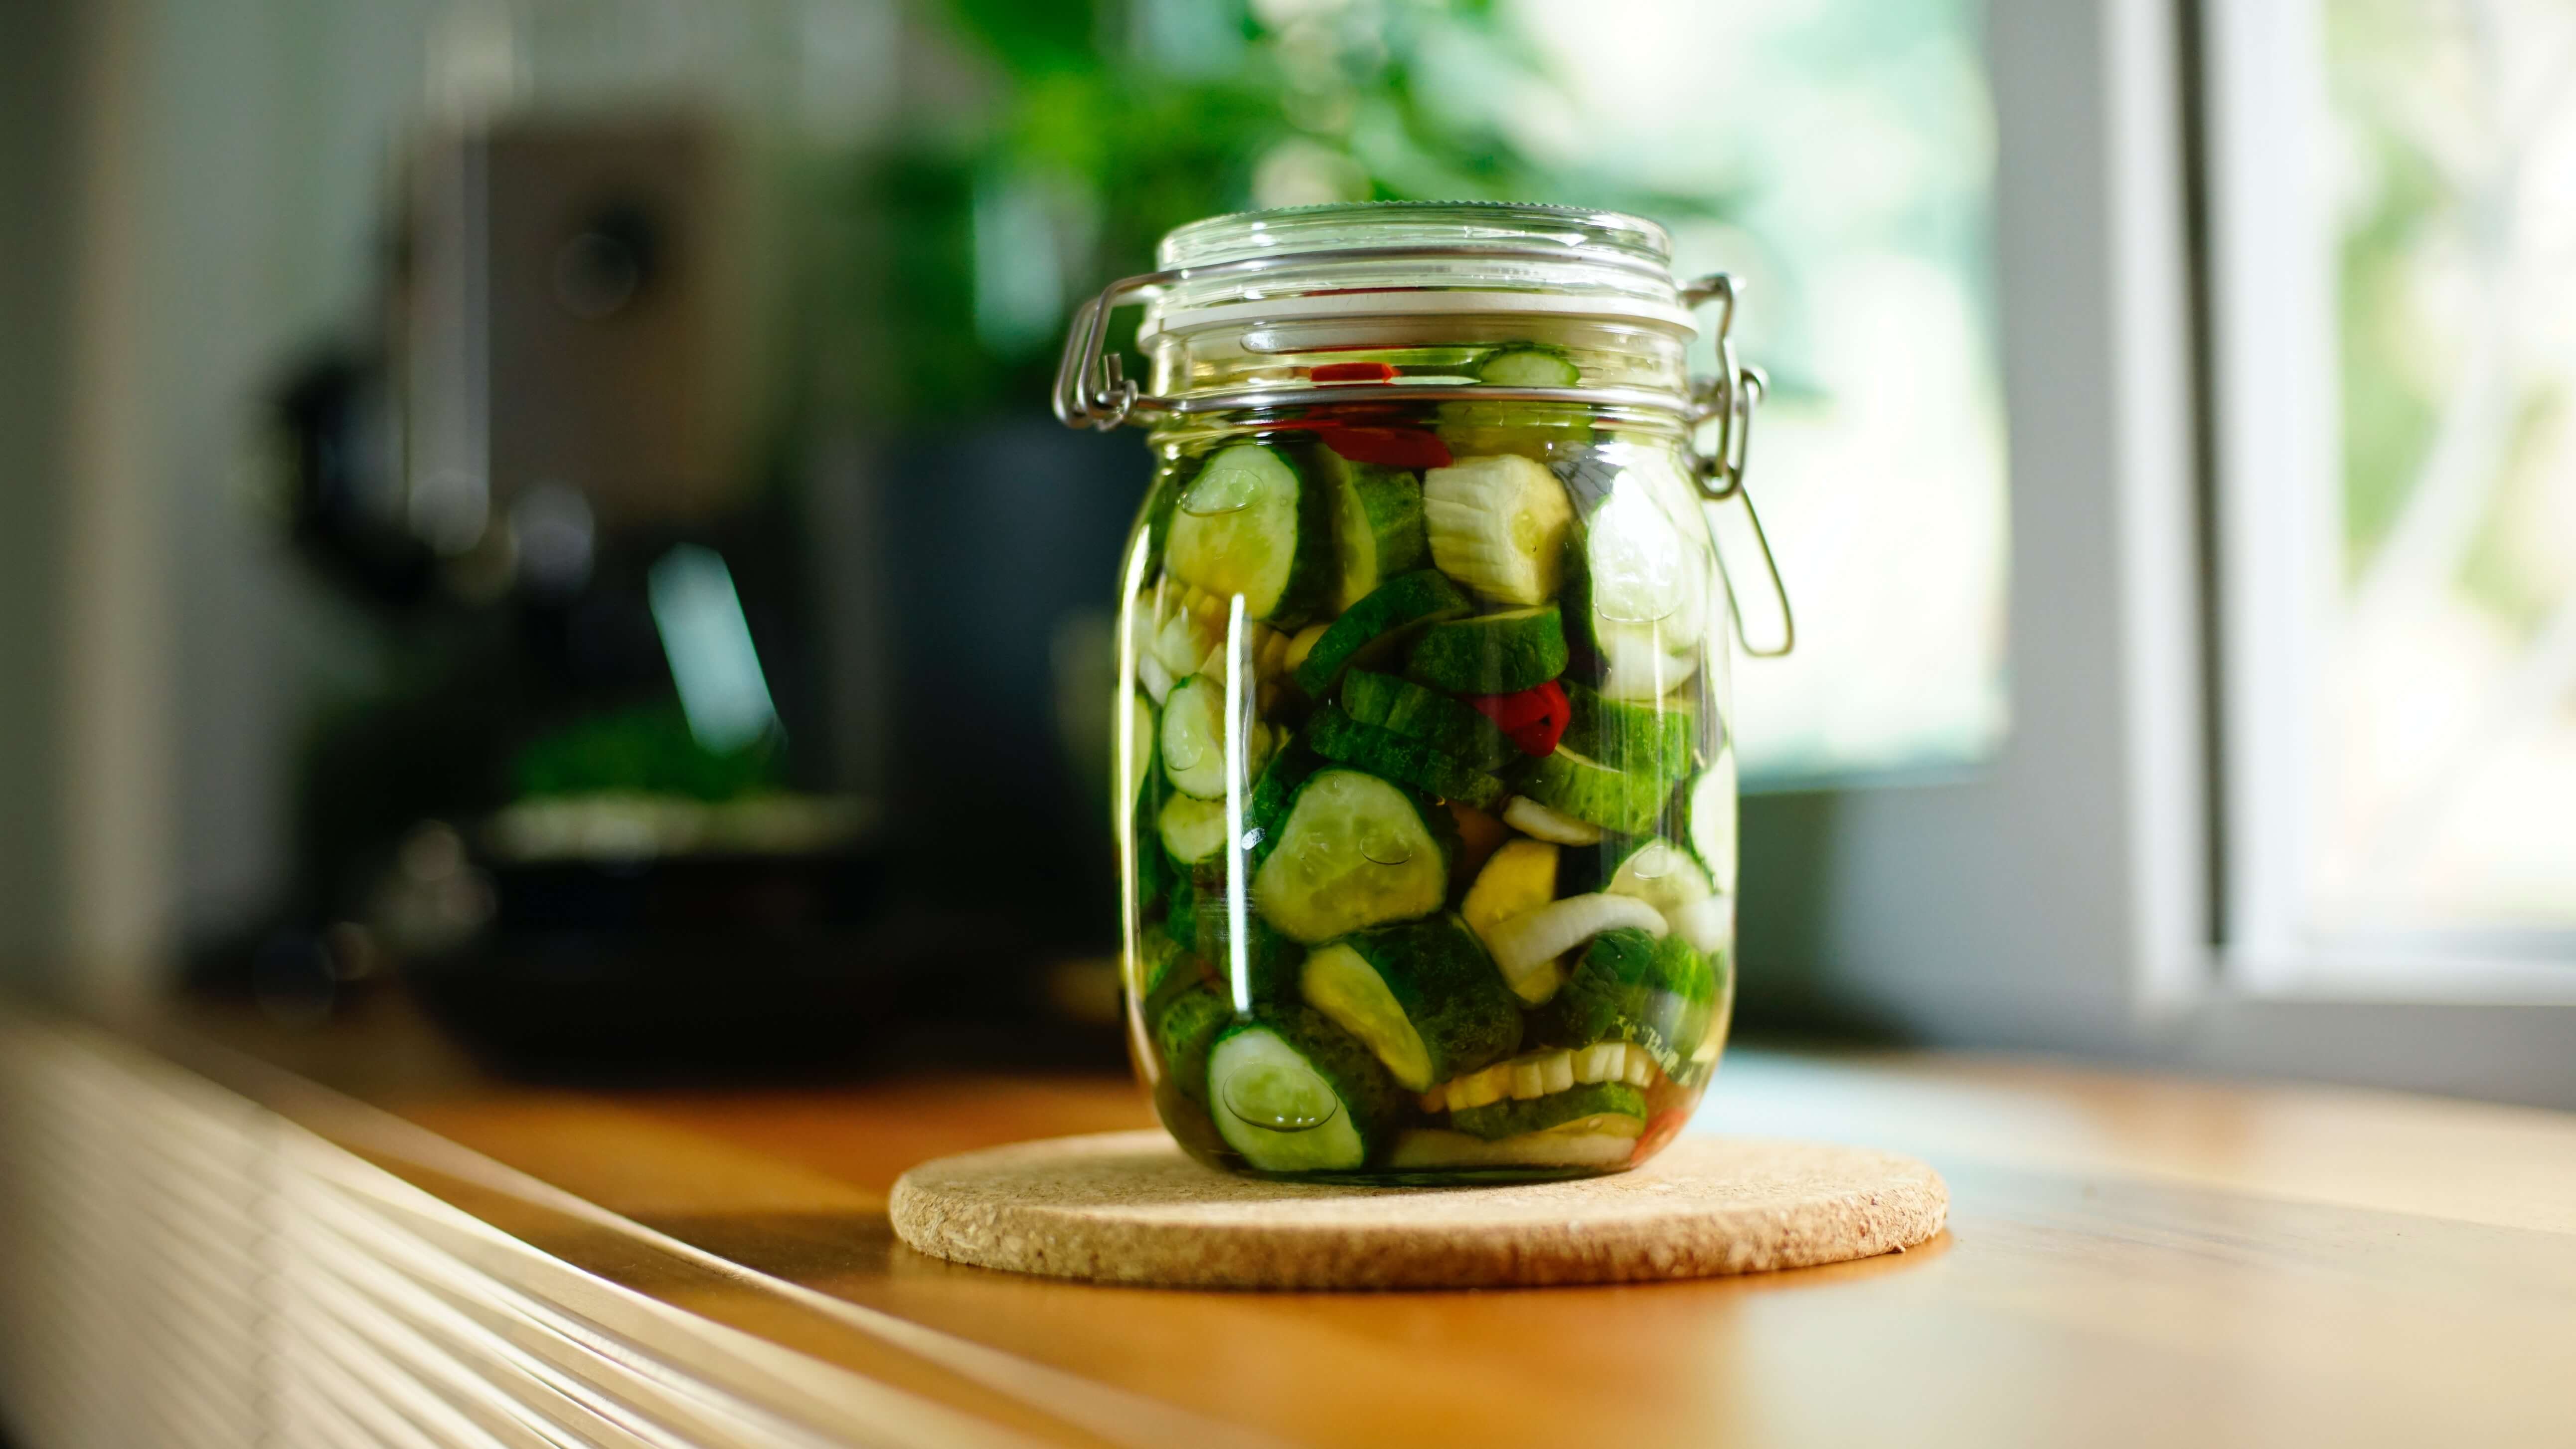 Fermented vegetables on the rise. Why and how to make the best pickles?